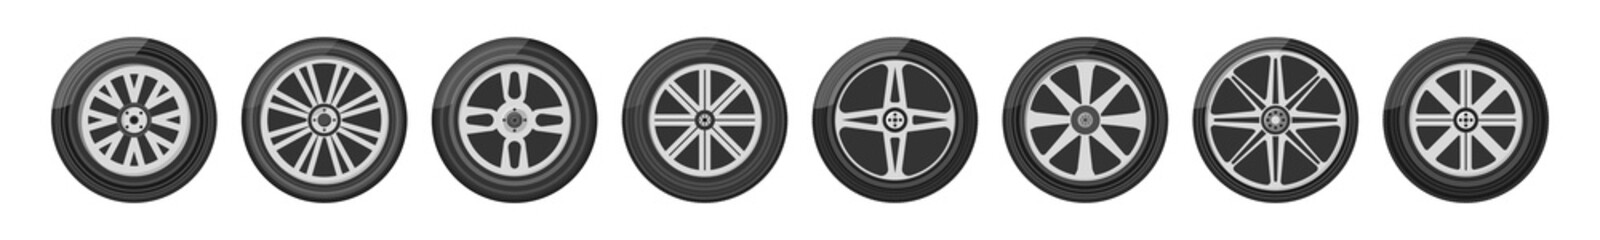 Set of car wheels icon. A wheel tyre for the car and the motorcycle and the truck and the SUV. Round and transportation, automobile equipment, vector illustration in flat design